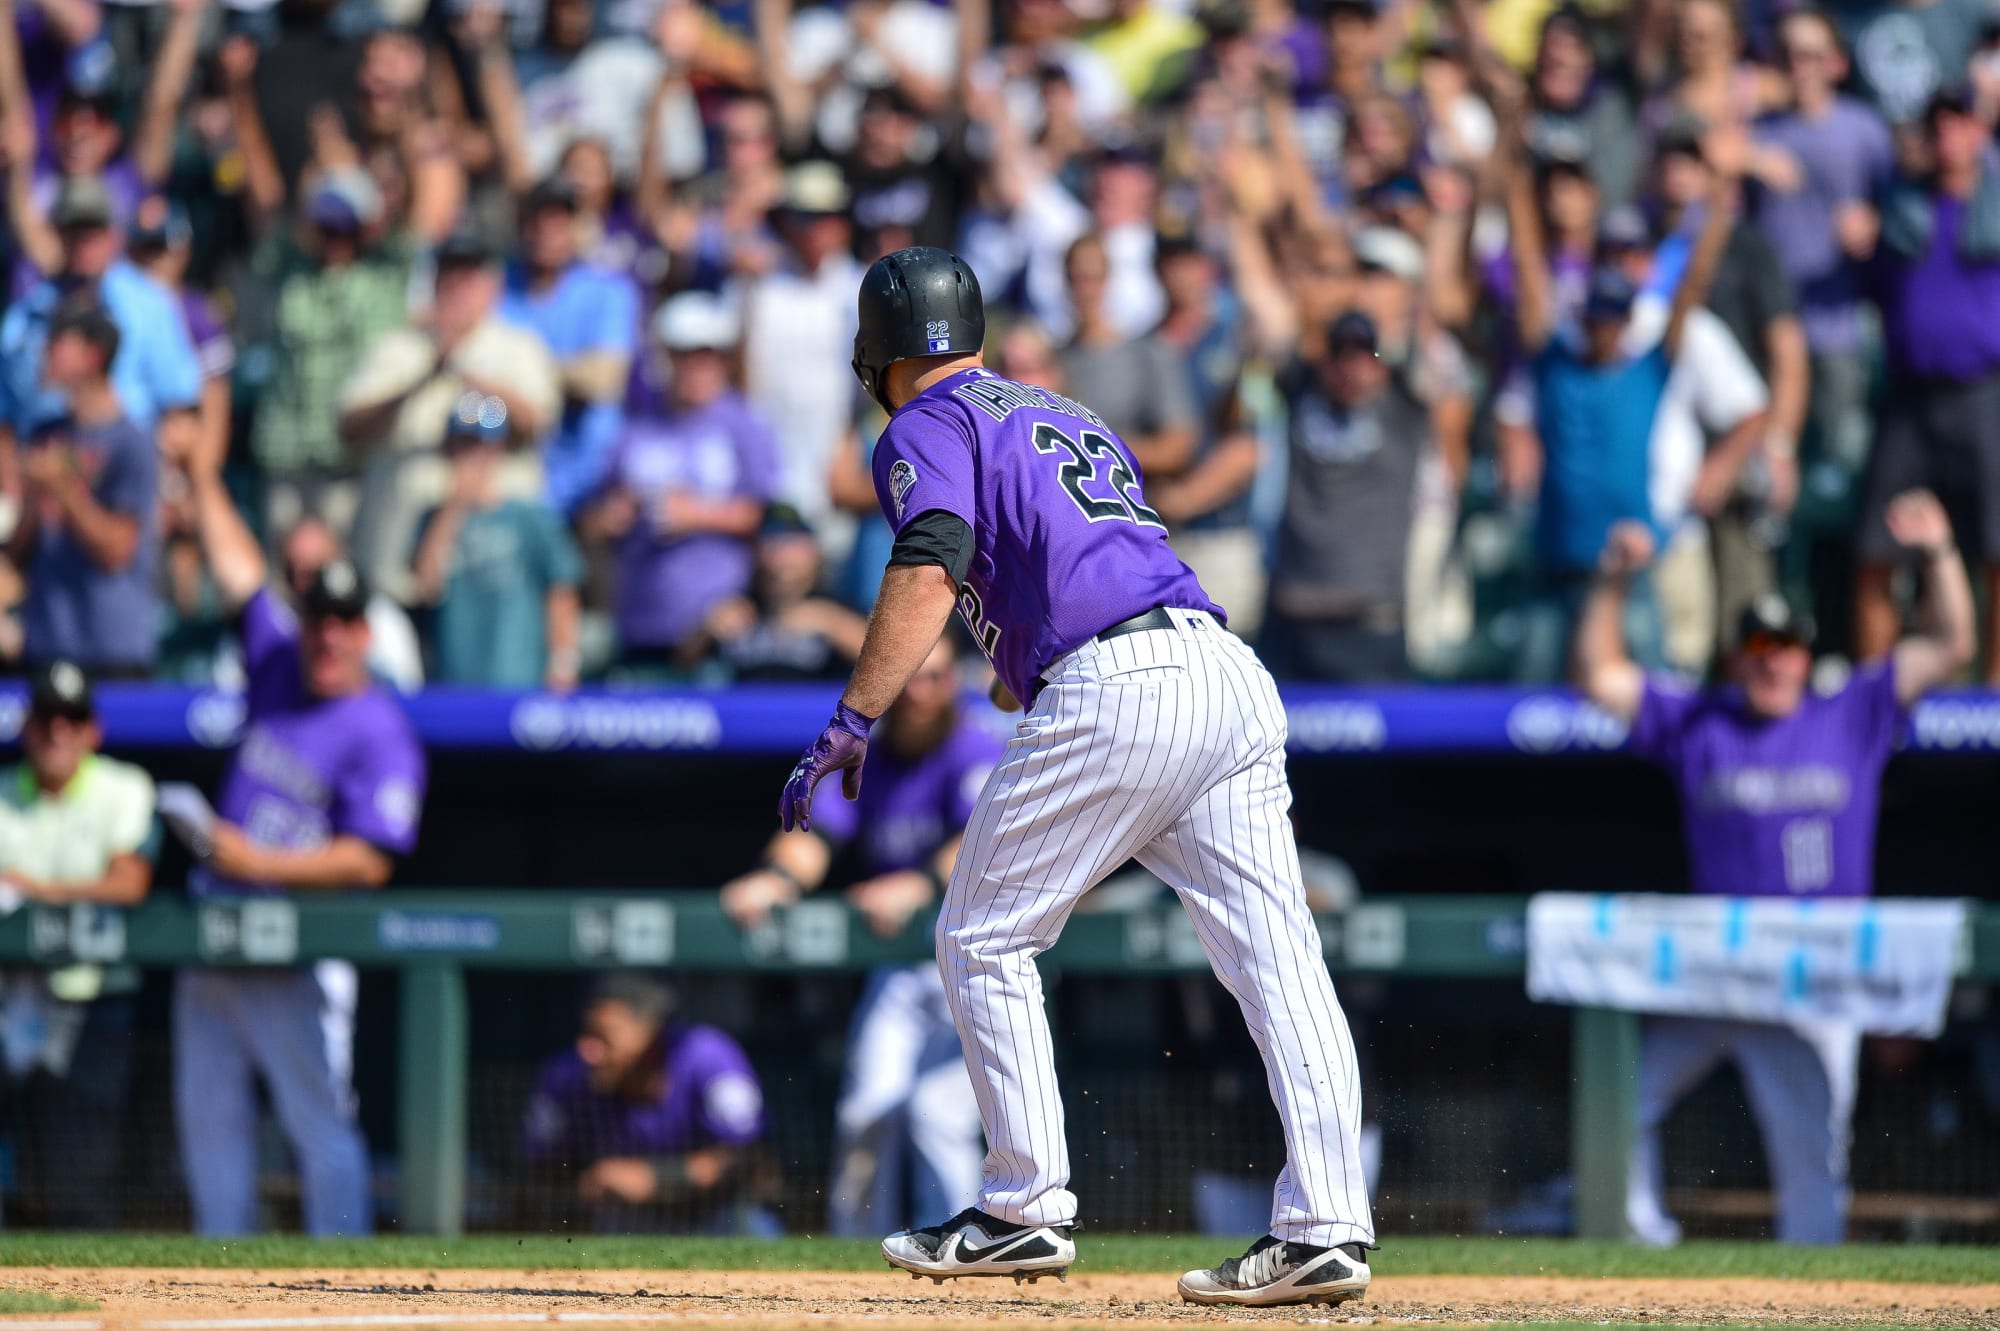 Colorado Rockies fans, you're needed at Coors Field next week